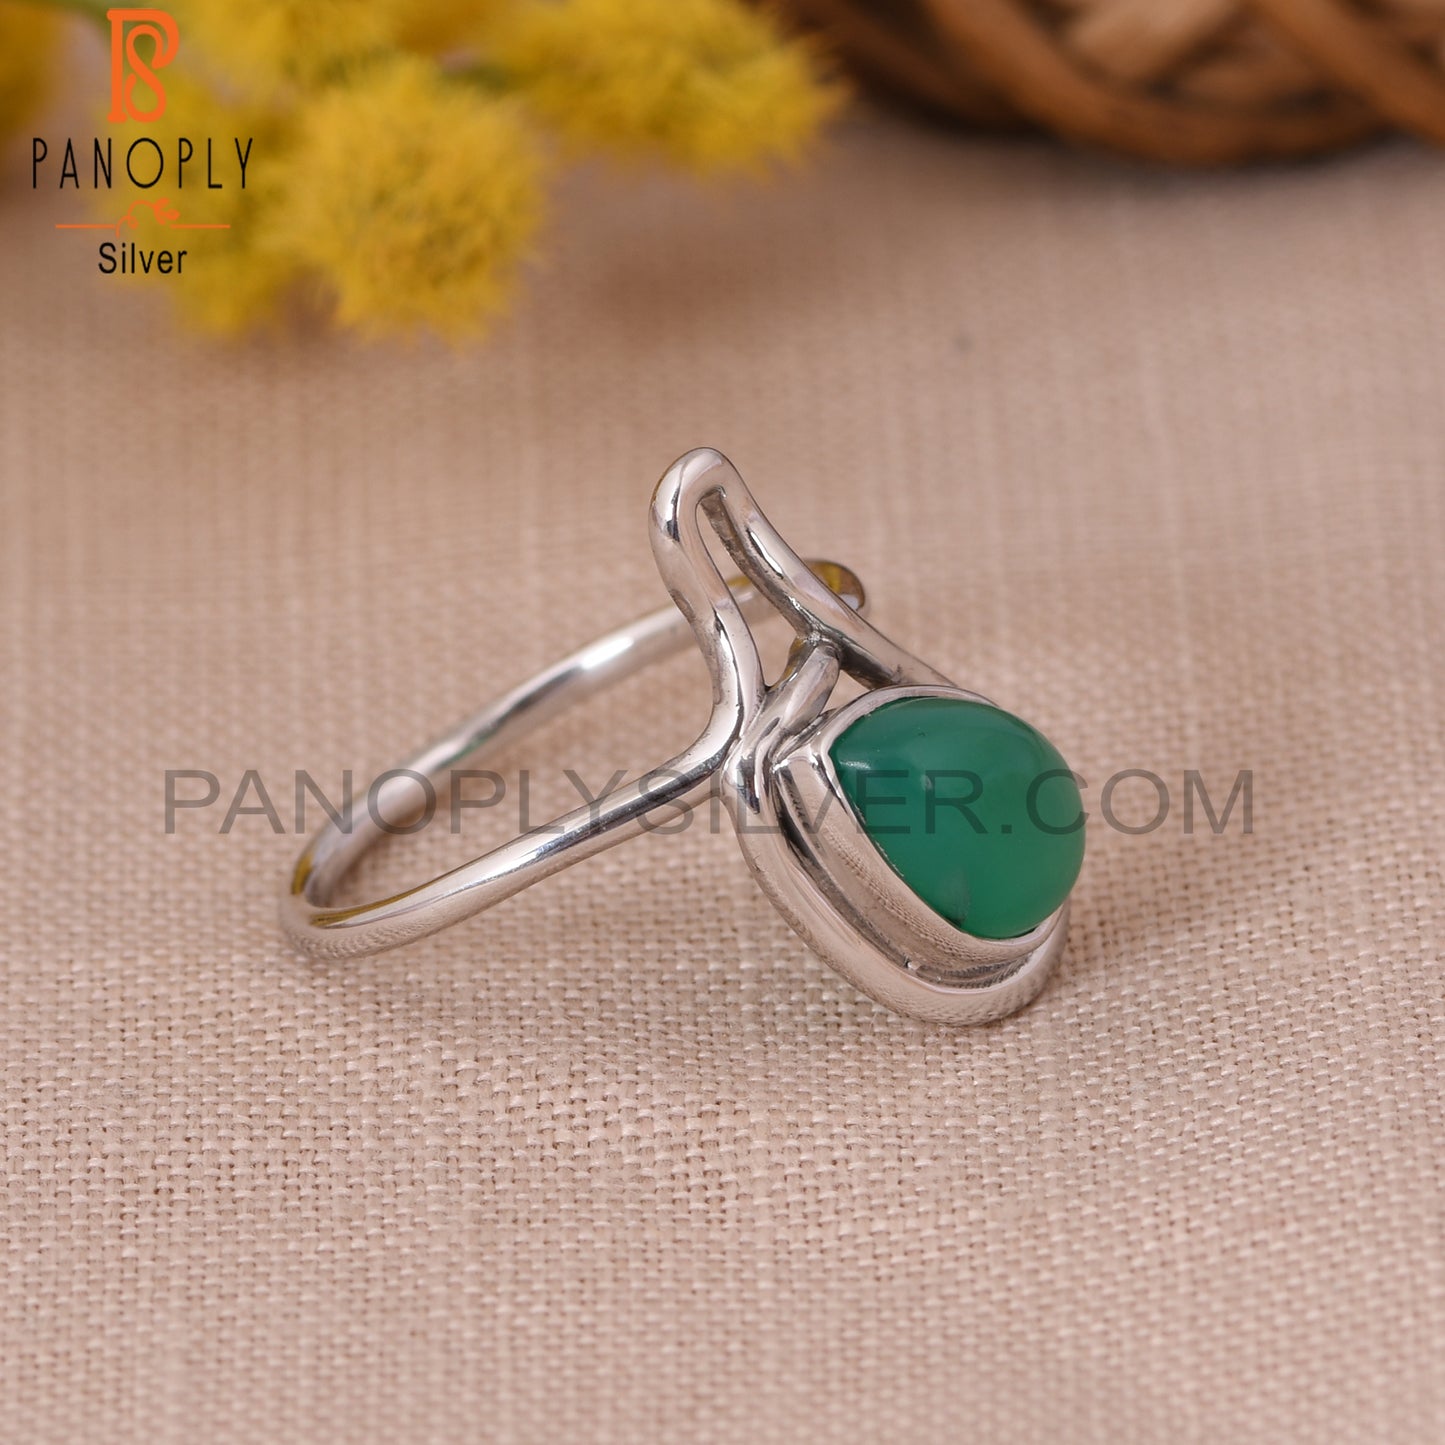 White Plated Green Onyx Gem Ring Jewelry